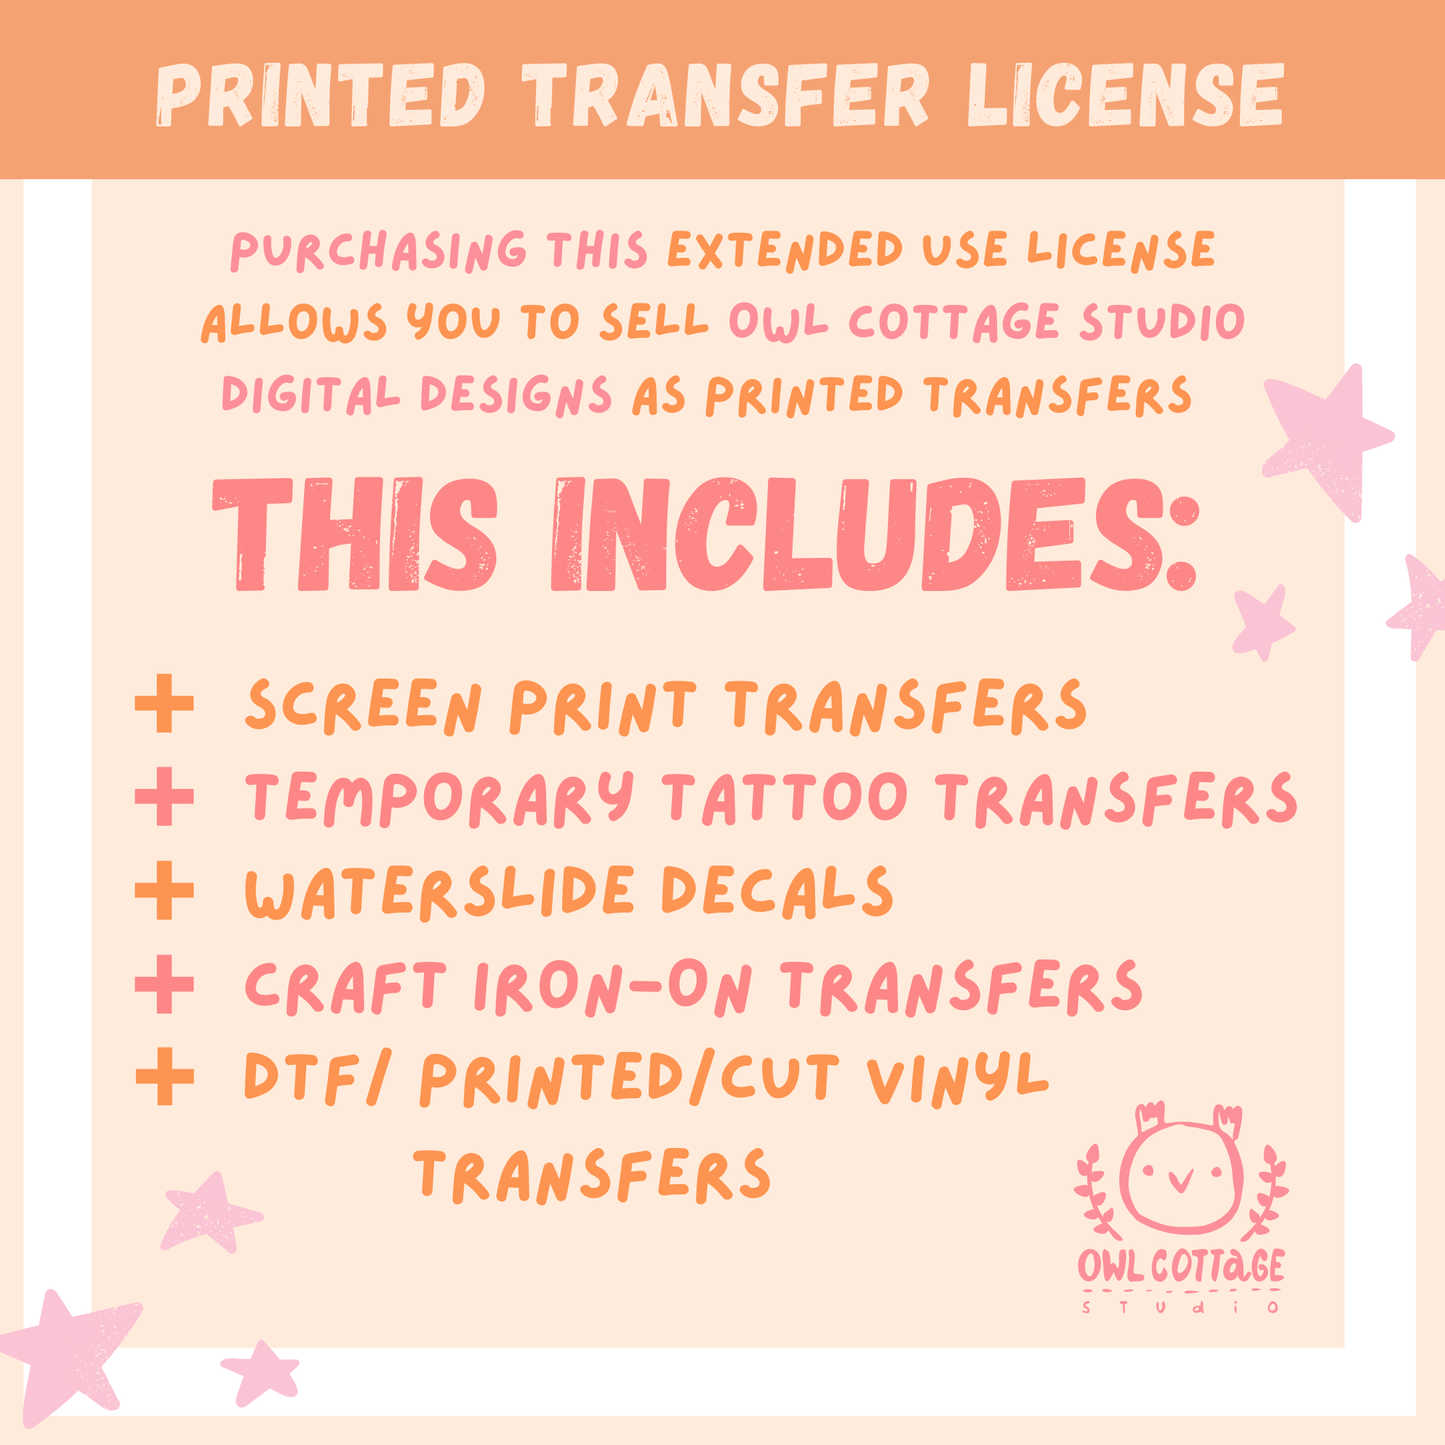 Extended Use License for selling Printed Transfers